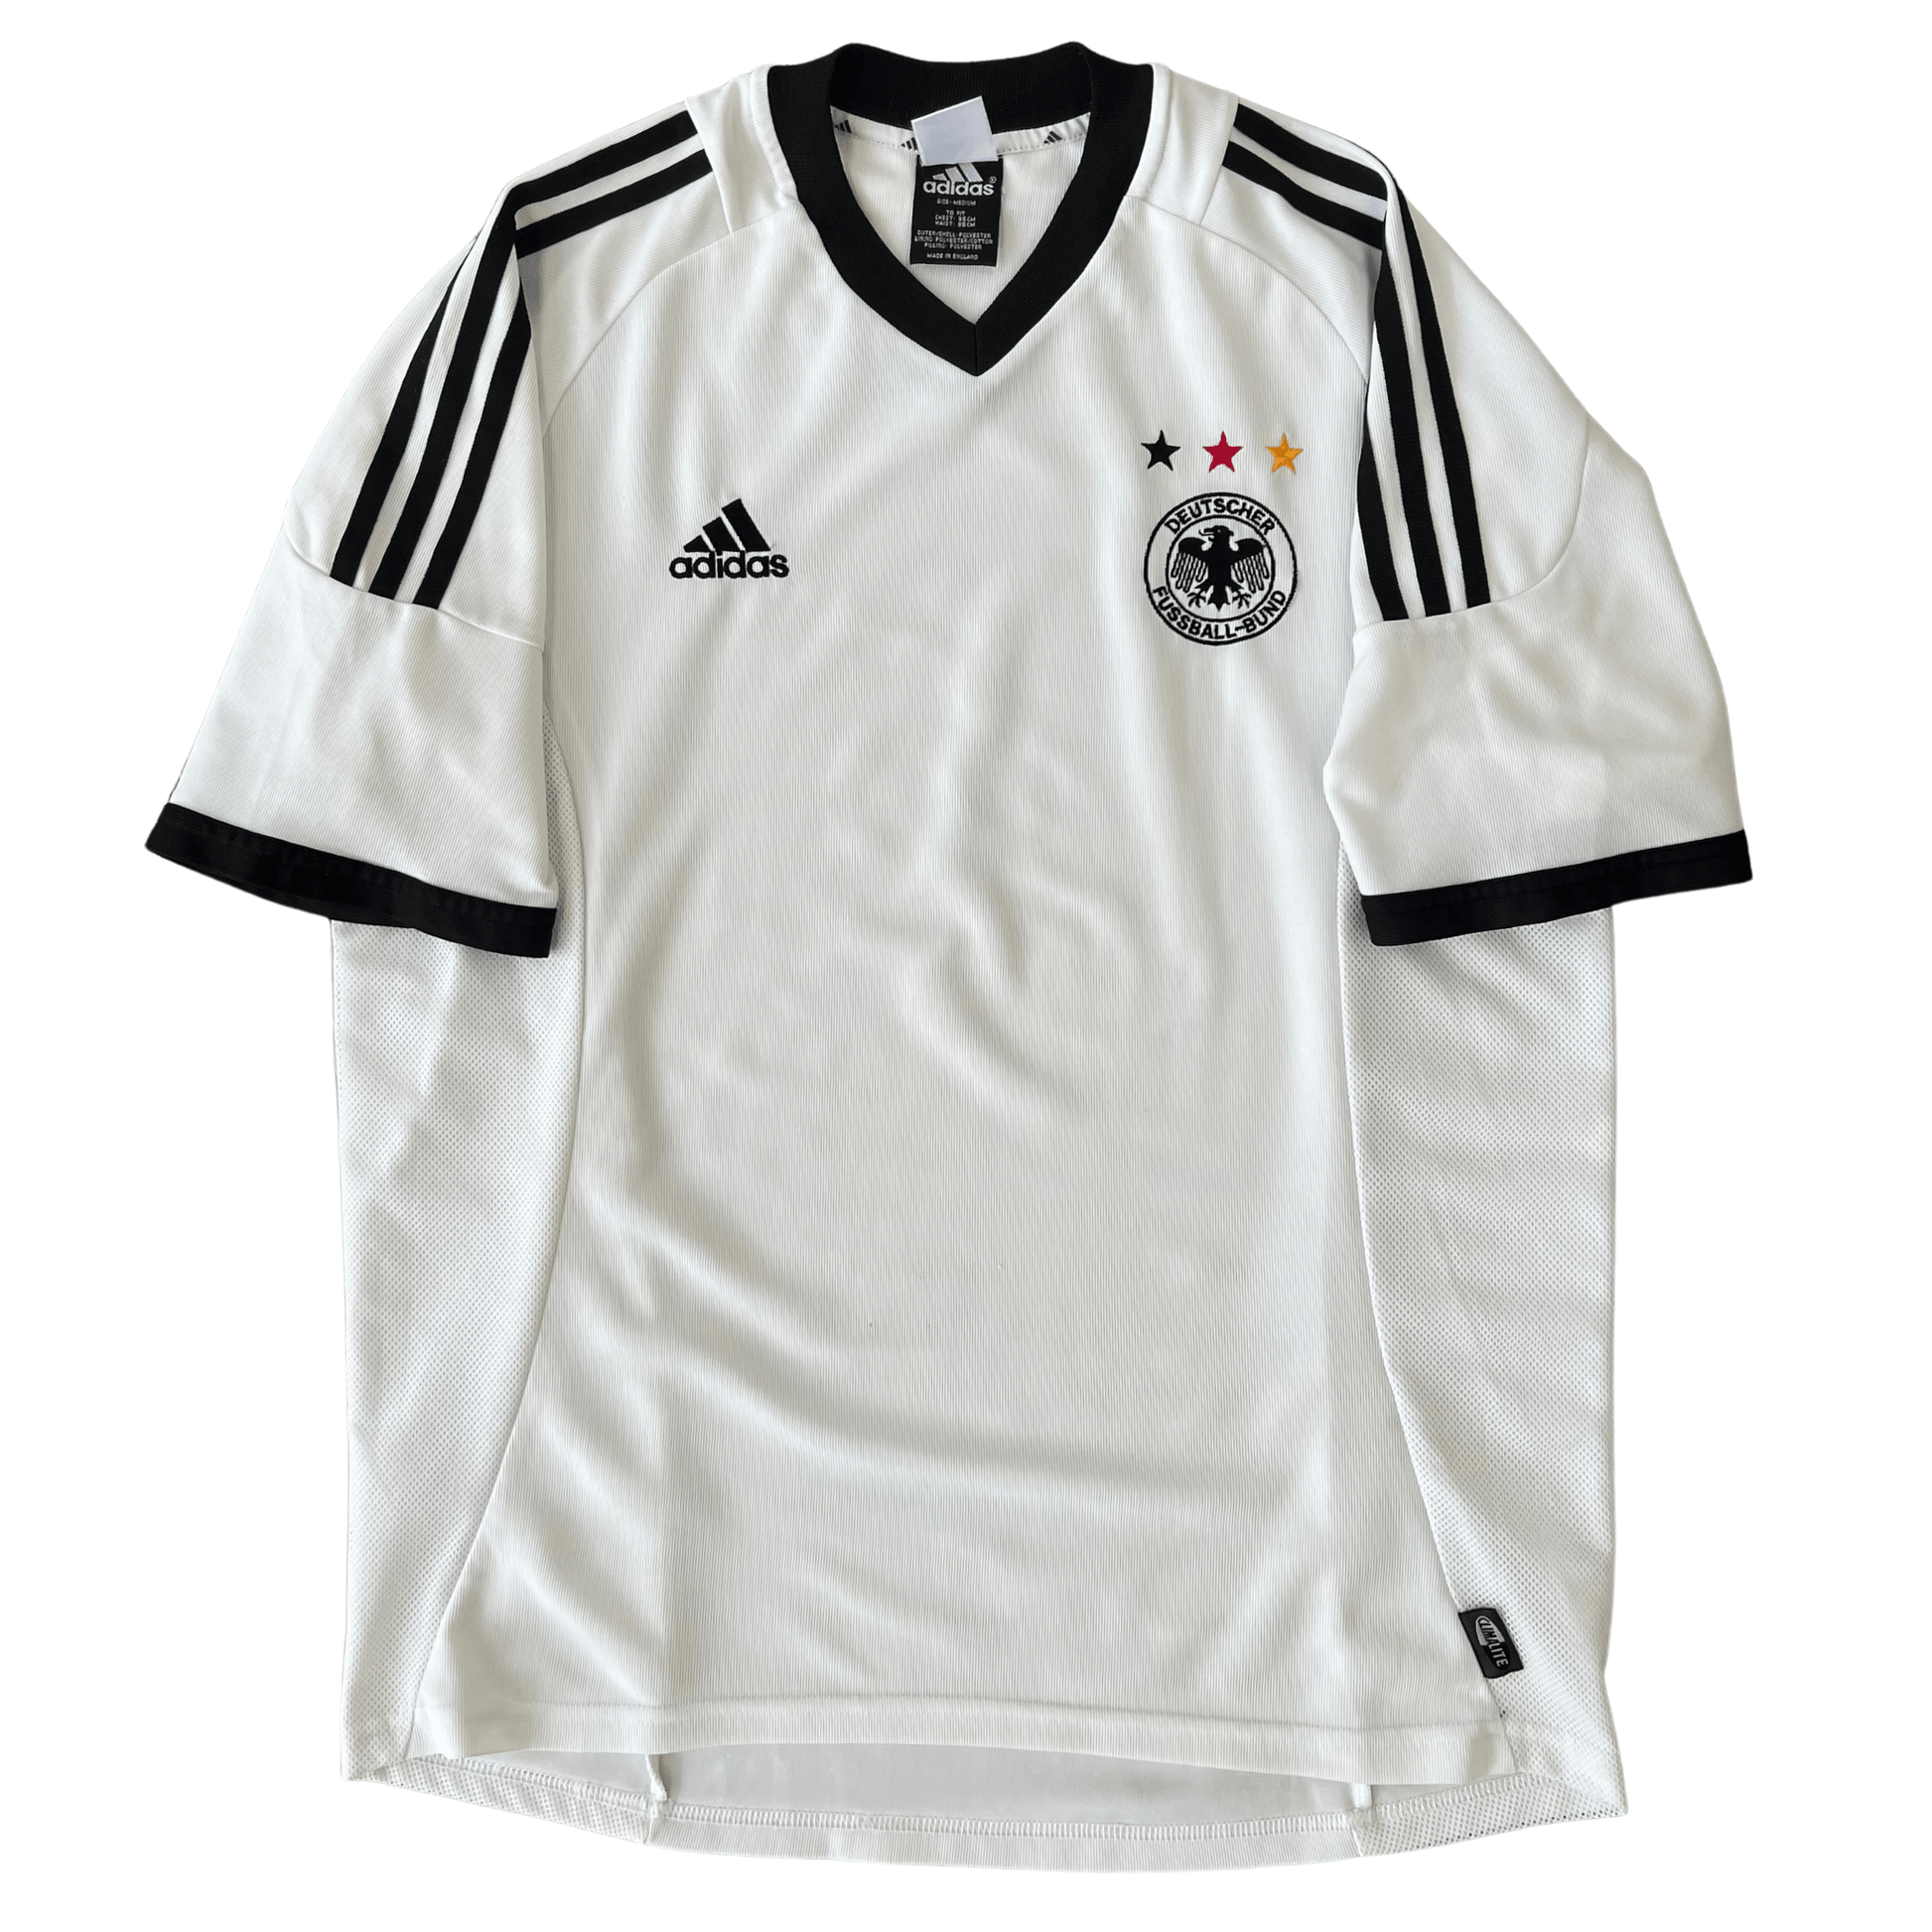 Germany 2002 Home Jersey - Front